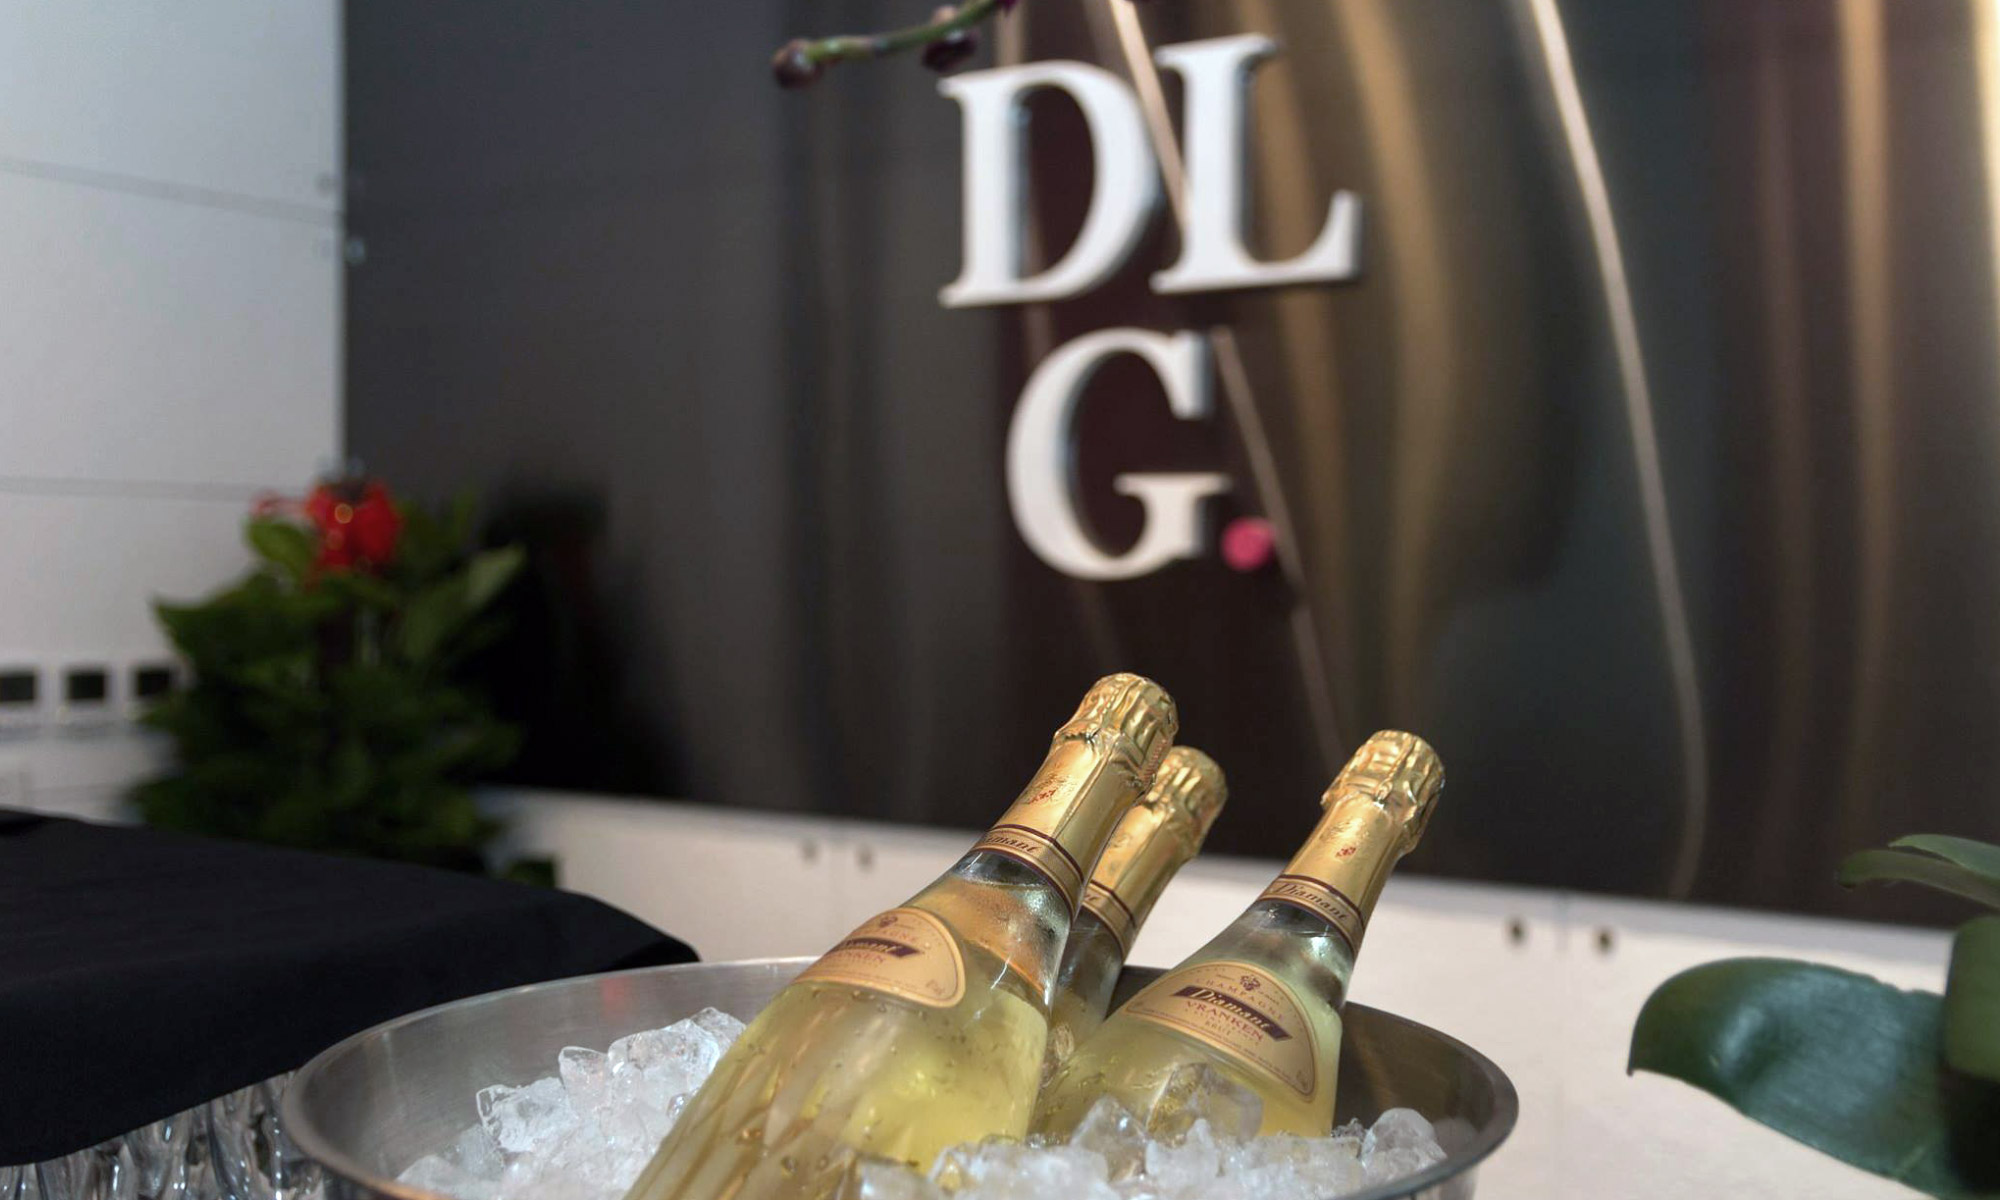 DLG logo with champagne